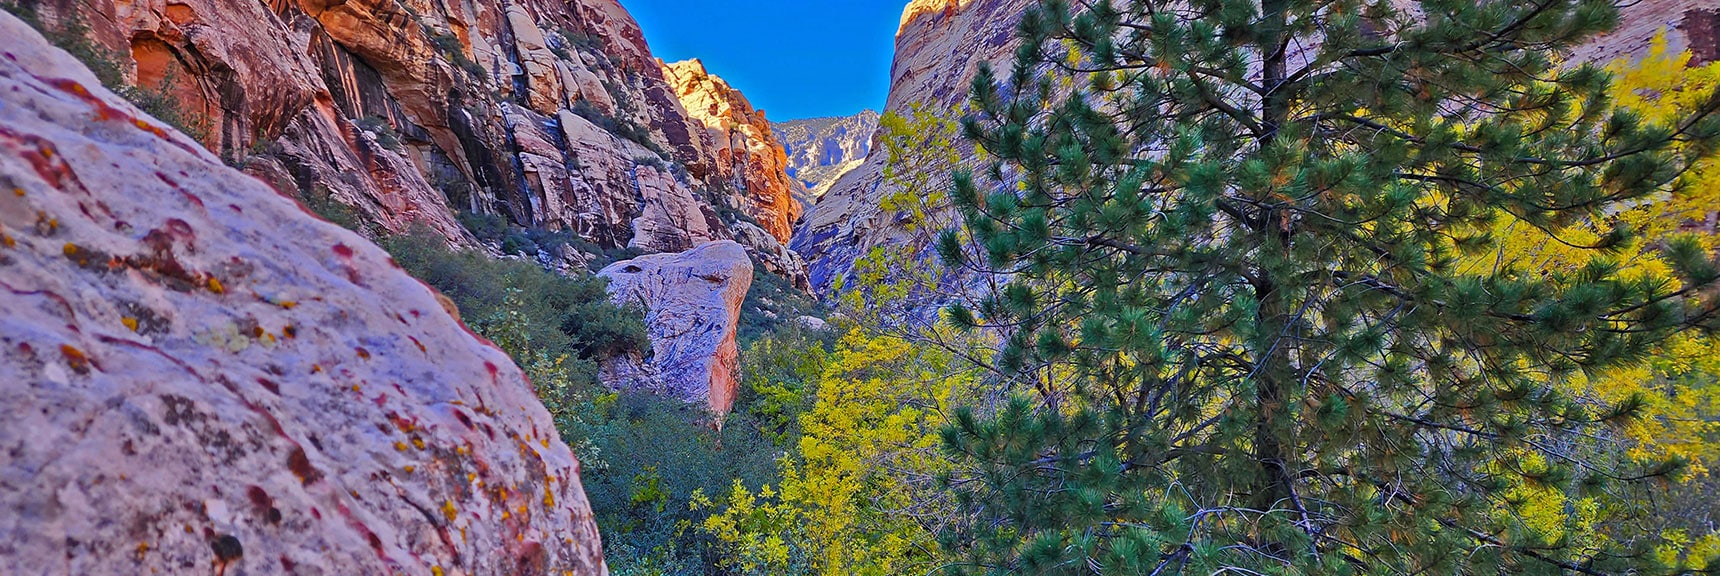 This Branch of the Canyon Also Beautiful, Chocked with Trees and Brush. | Rock Climber Observations | Pine Creek Canyon | Rainbow Mountain Wilderness, Nevada